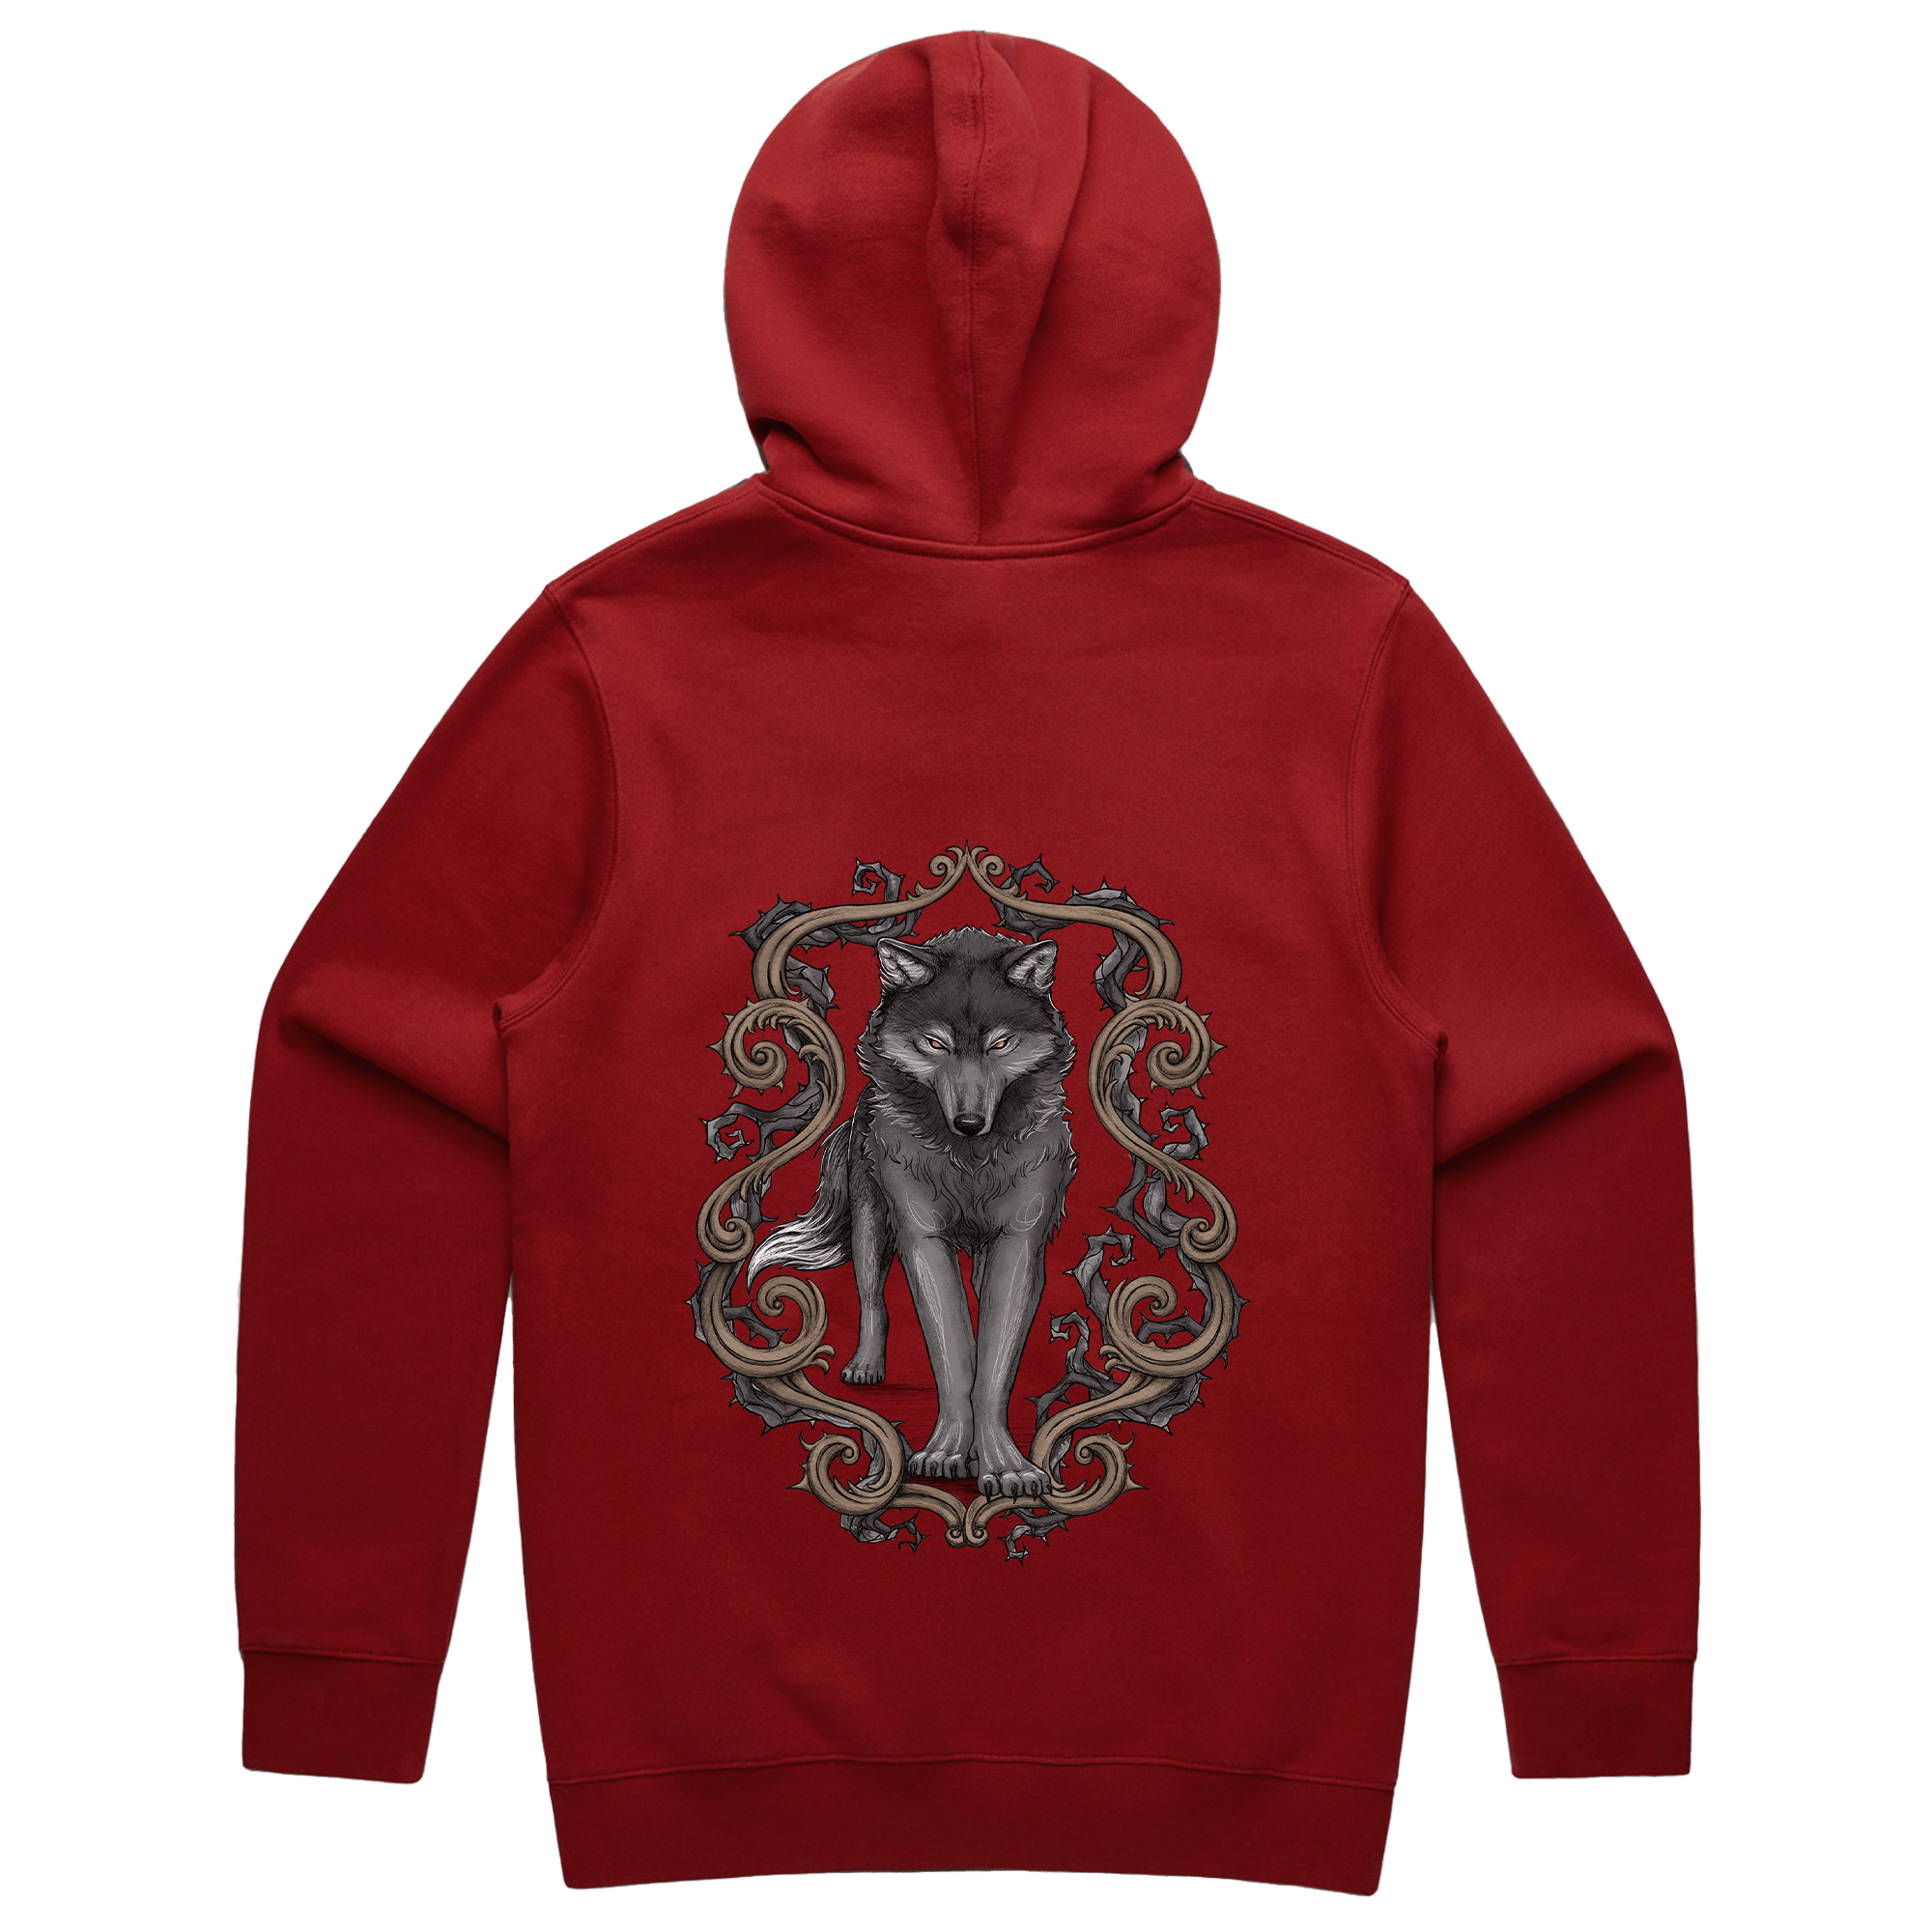 Stray Hoodie (Limited Red) - Emma Norton